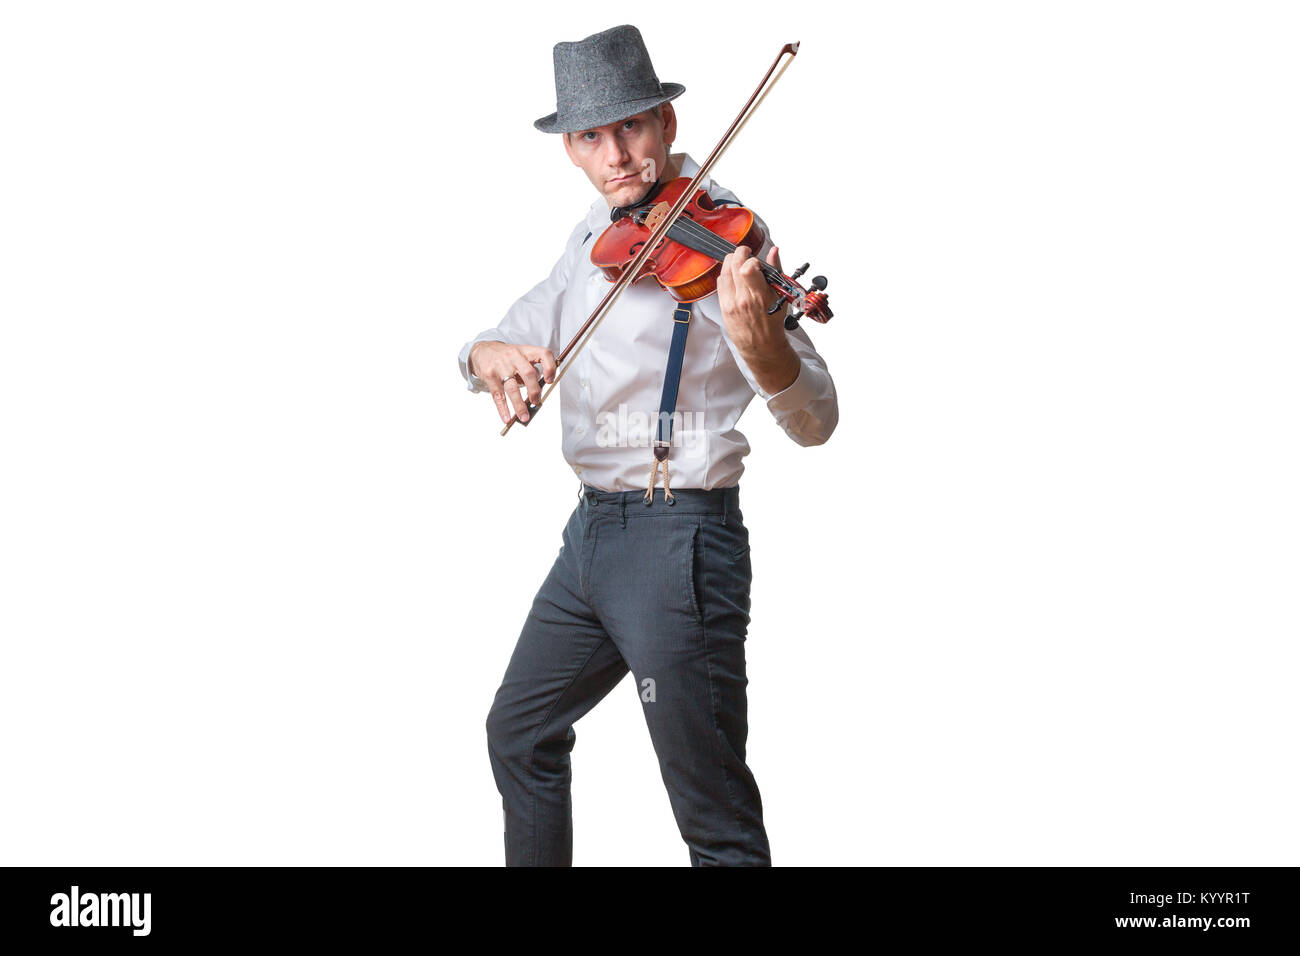 Man with hat plays the violin Stock Photo